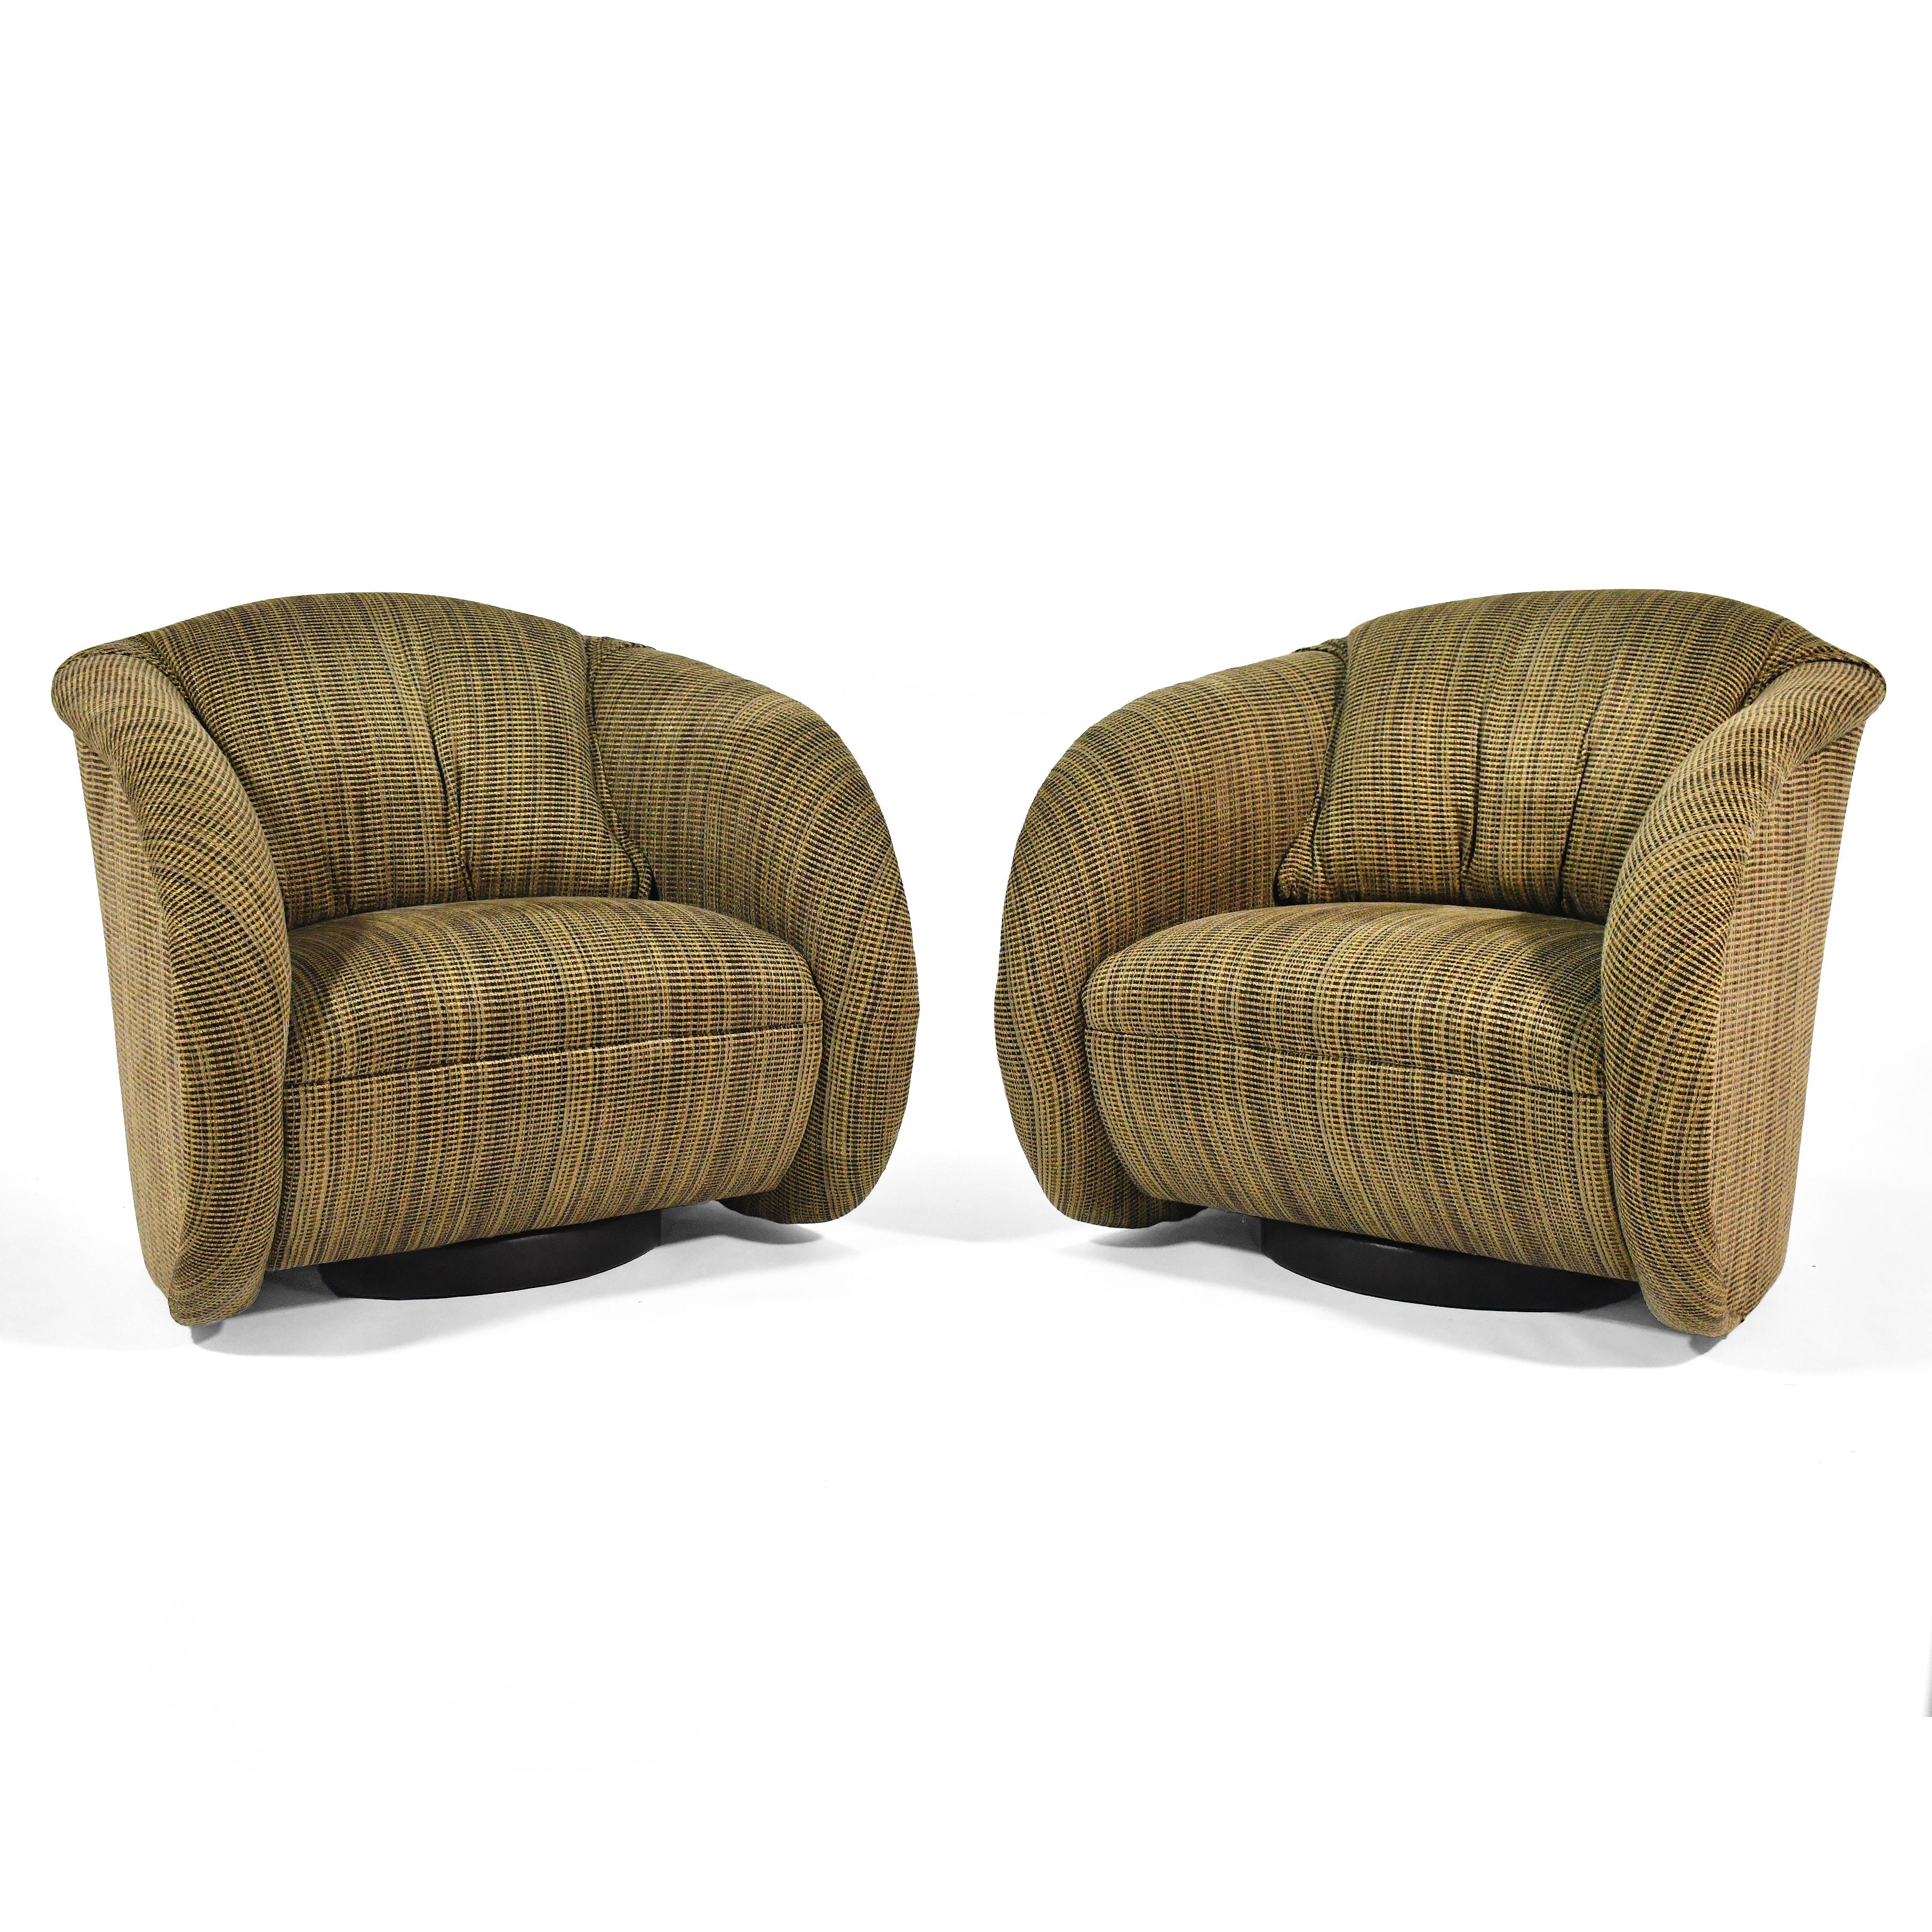 These comfortable and handsome barrel club chairs have a sculptural quality that is very similar to the designs of Vladimir Kagan. They sit on swivel bases with automatic return.

We have four chairs available. Price is per pair.